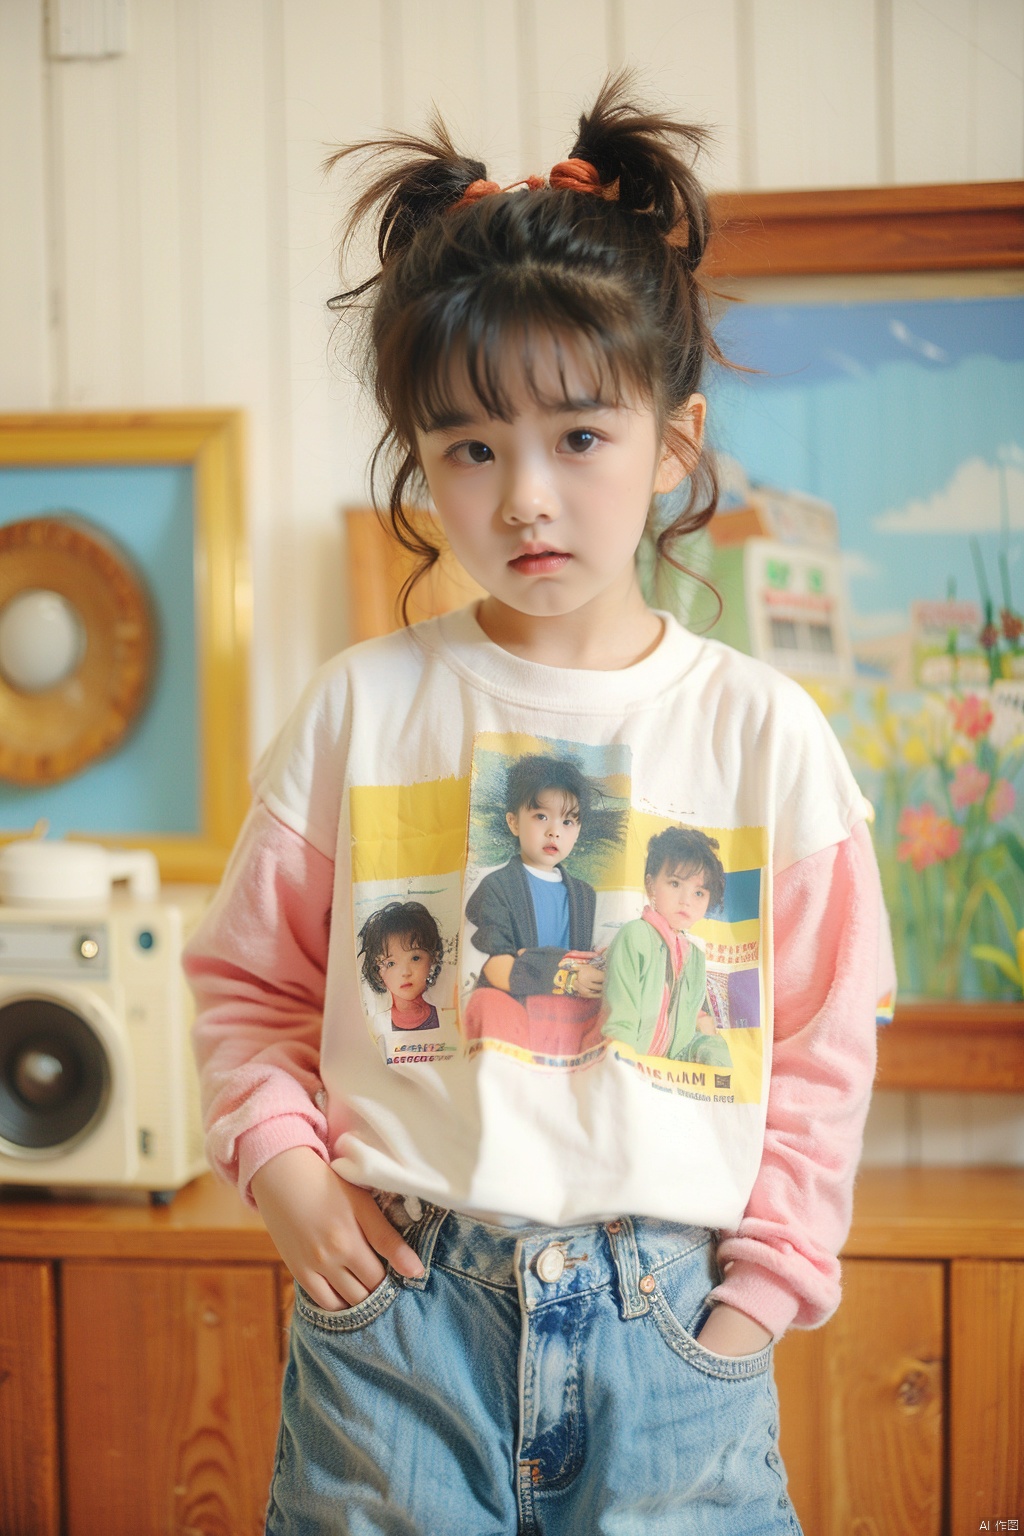  ((Masterpiece)), ((Best Quality)),80sDBA style, little girl, solo ,